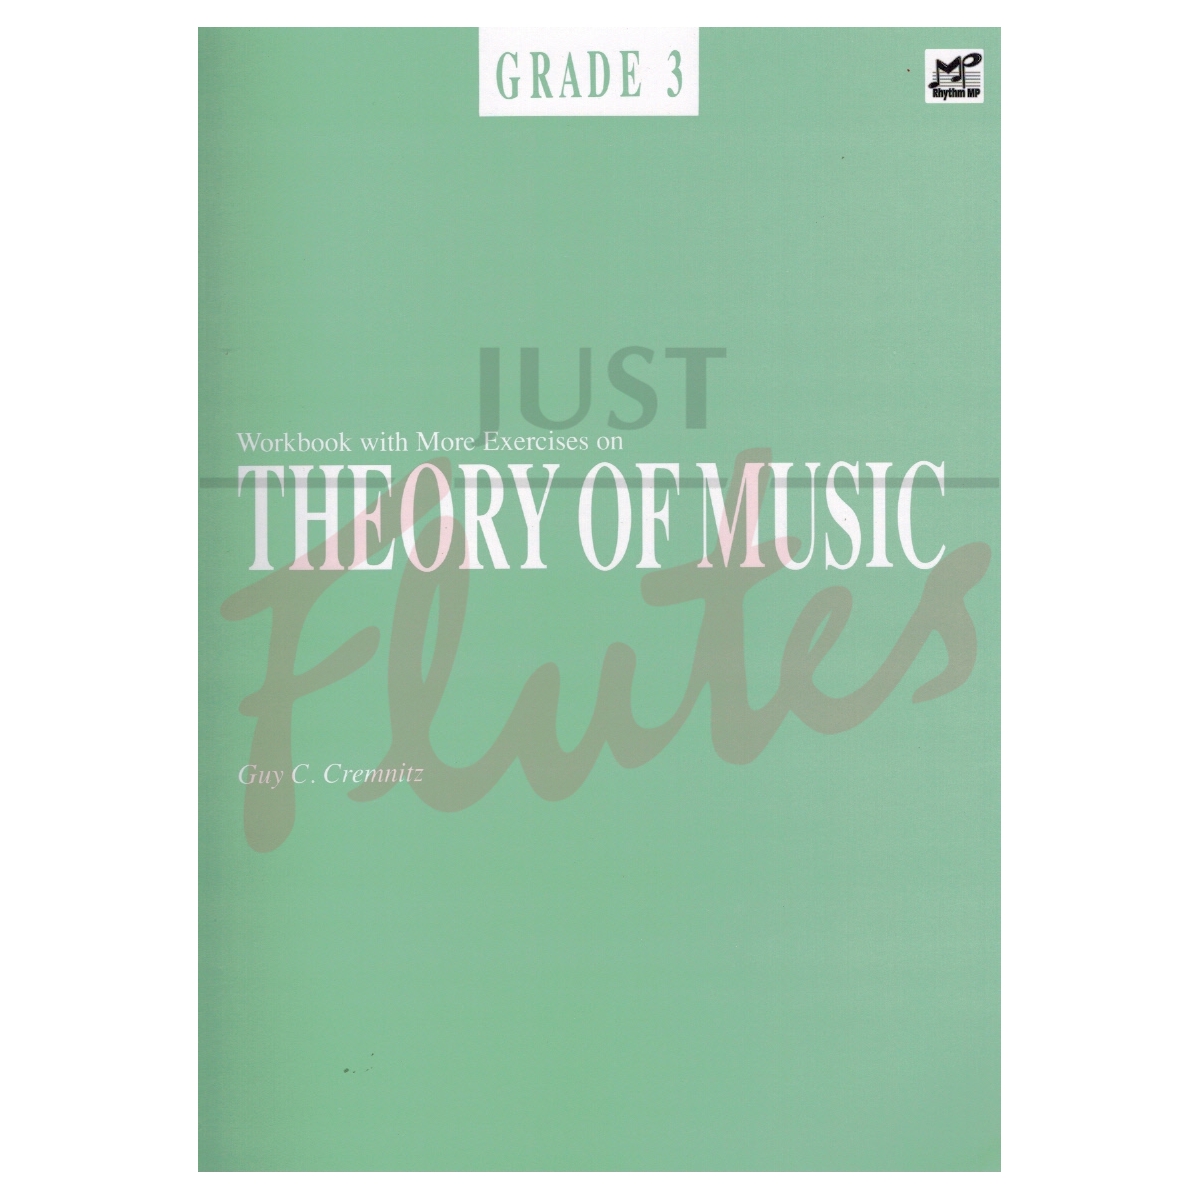 Workbook with More Exercises on Theory of Music Grade 3